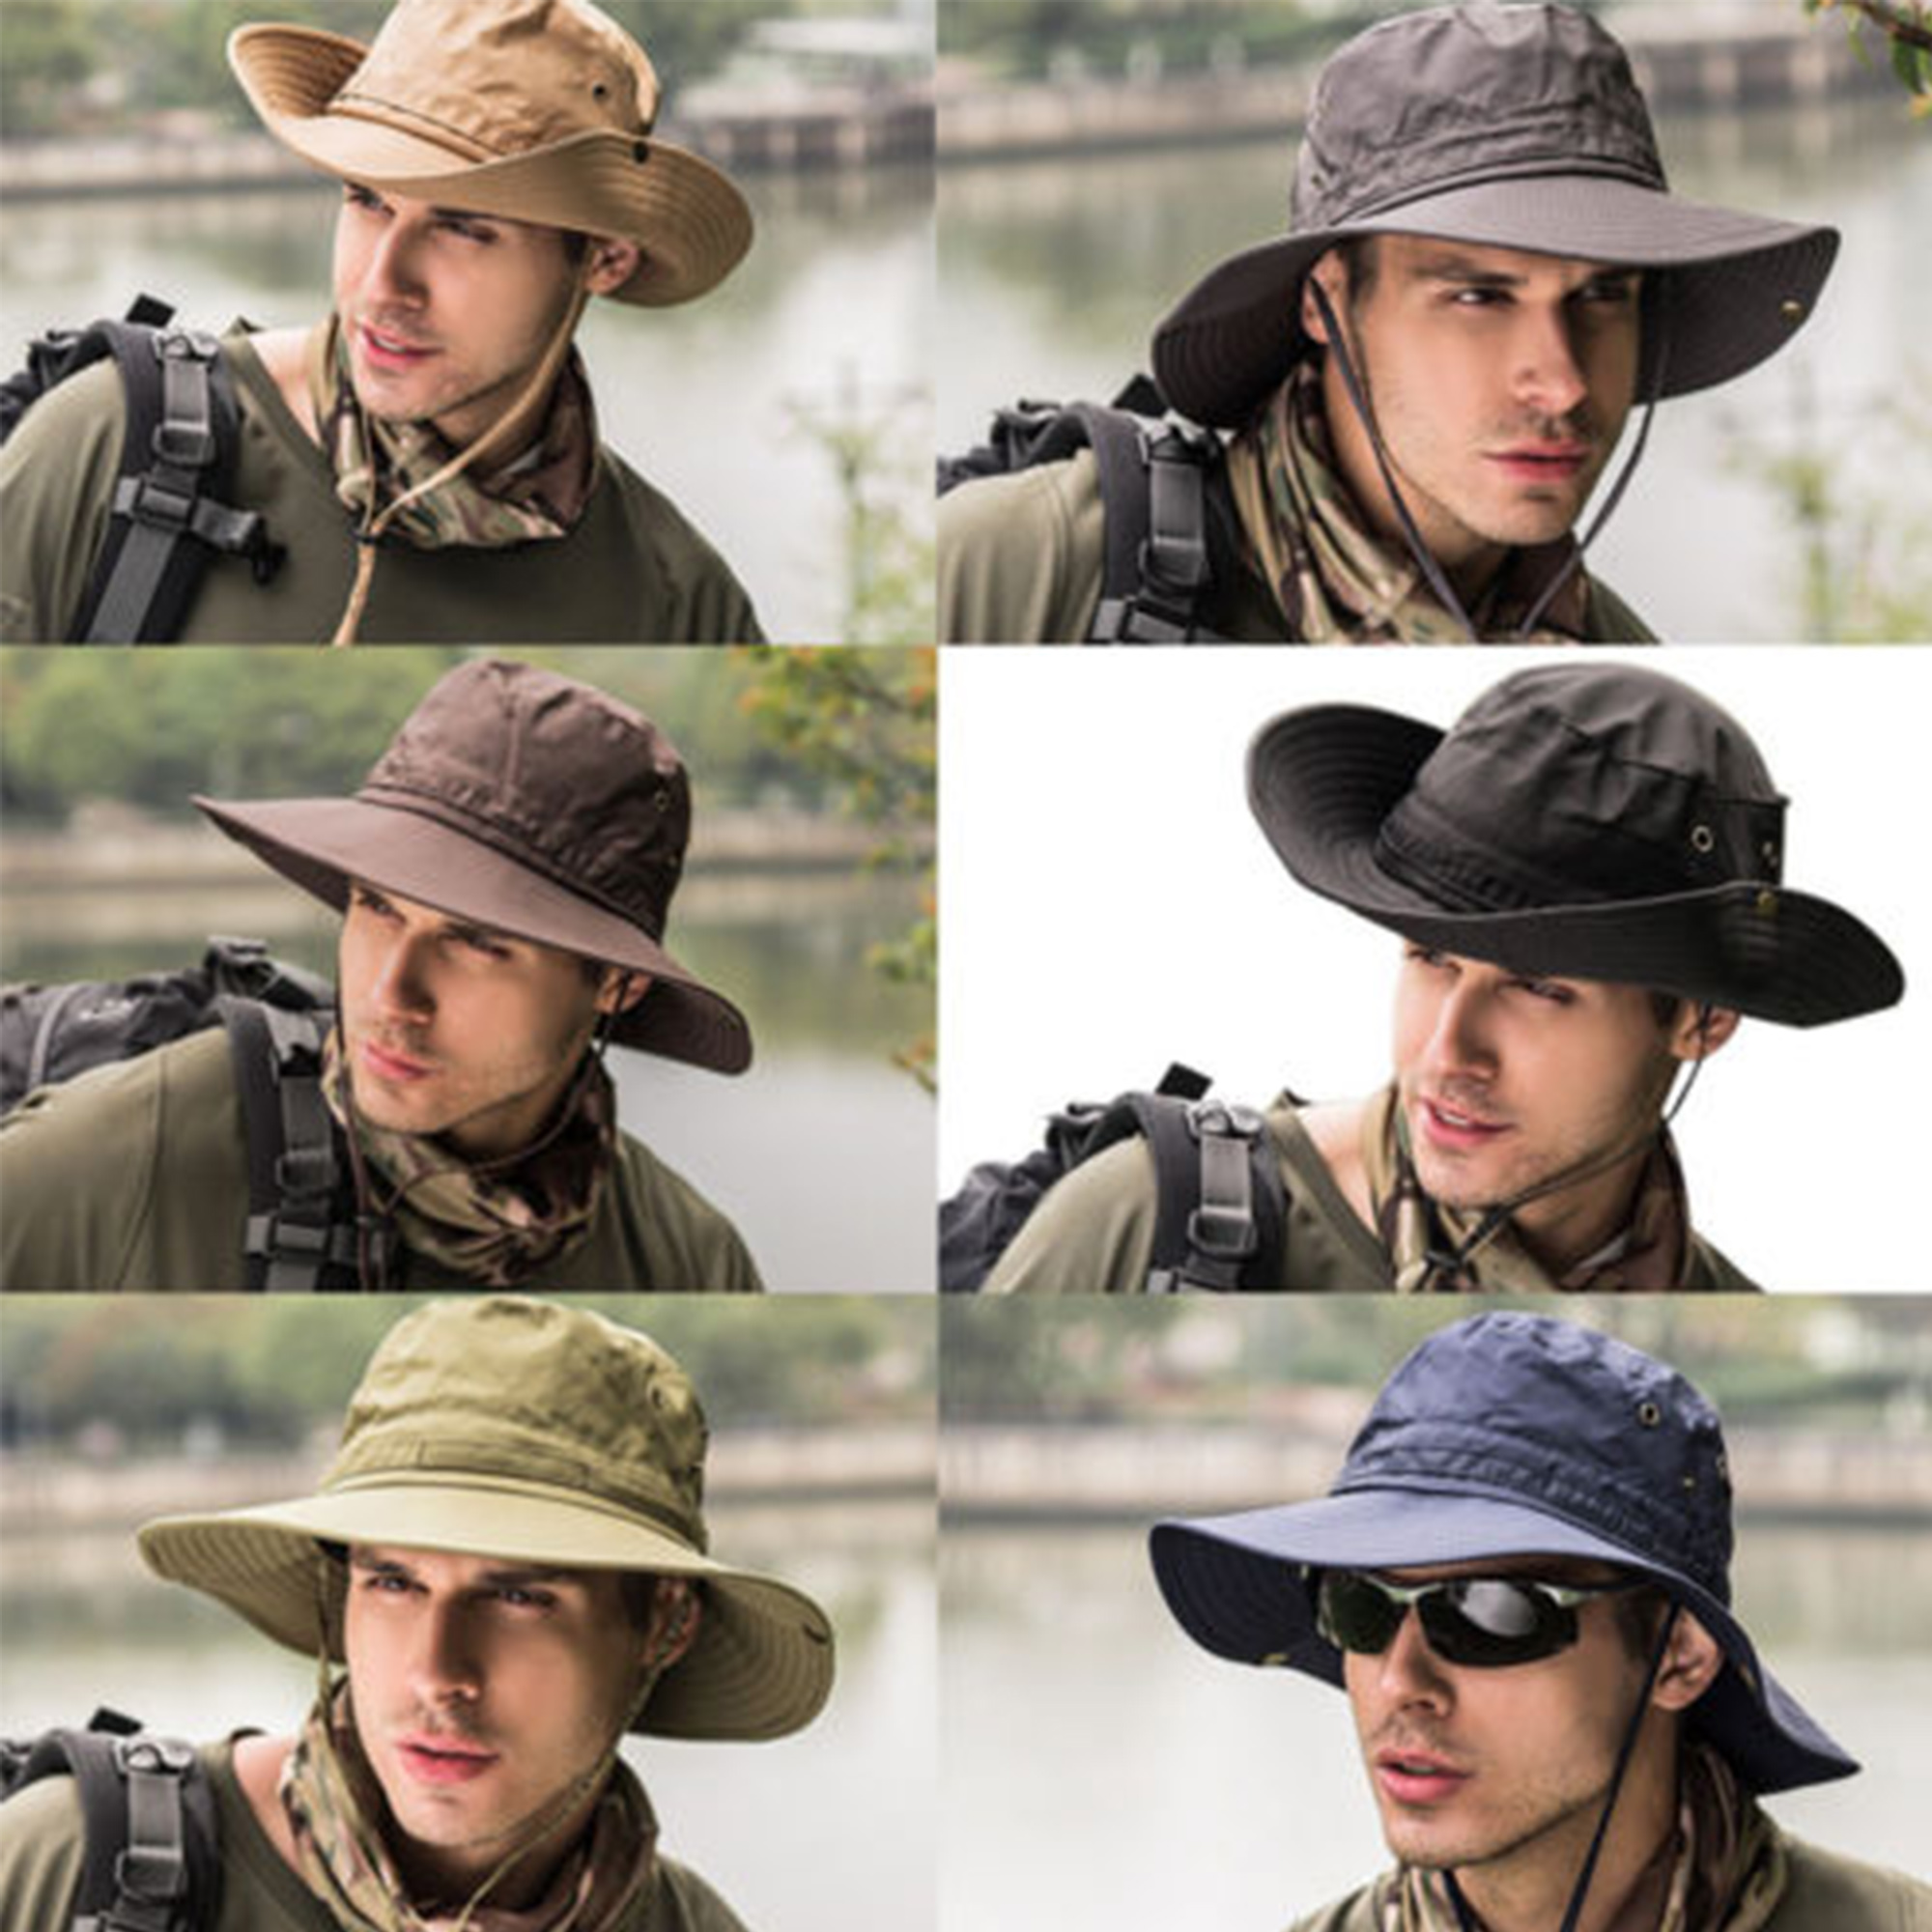 SUNSIOM Men's Military Bucket Hat Boonie Hunting Fishing Climbing Outdoor Wide Cap Brim - image 4 of 6